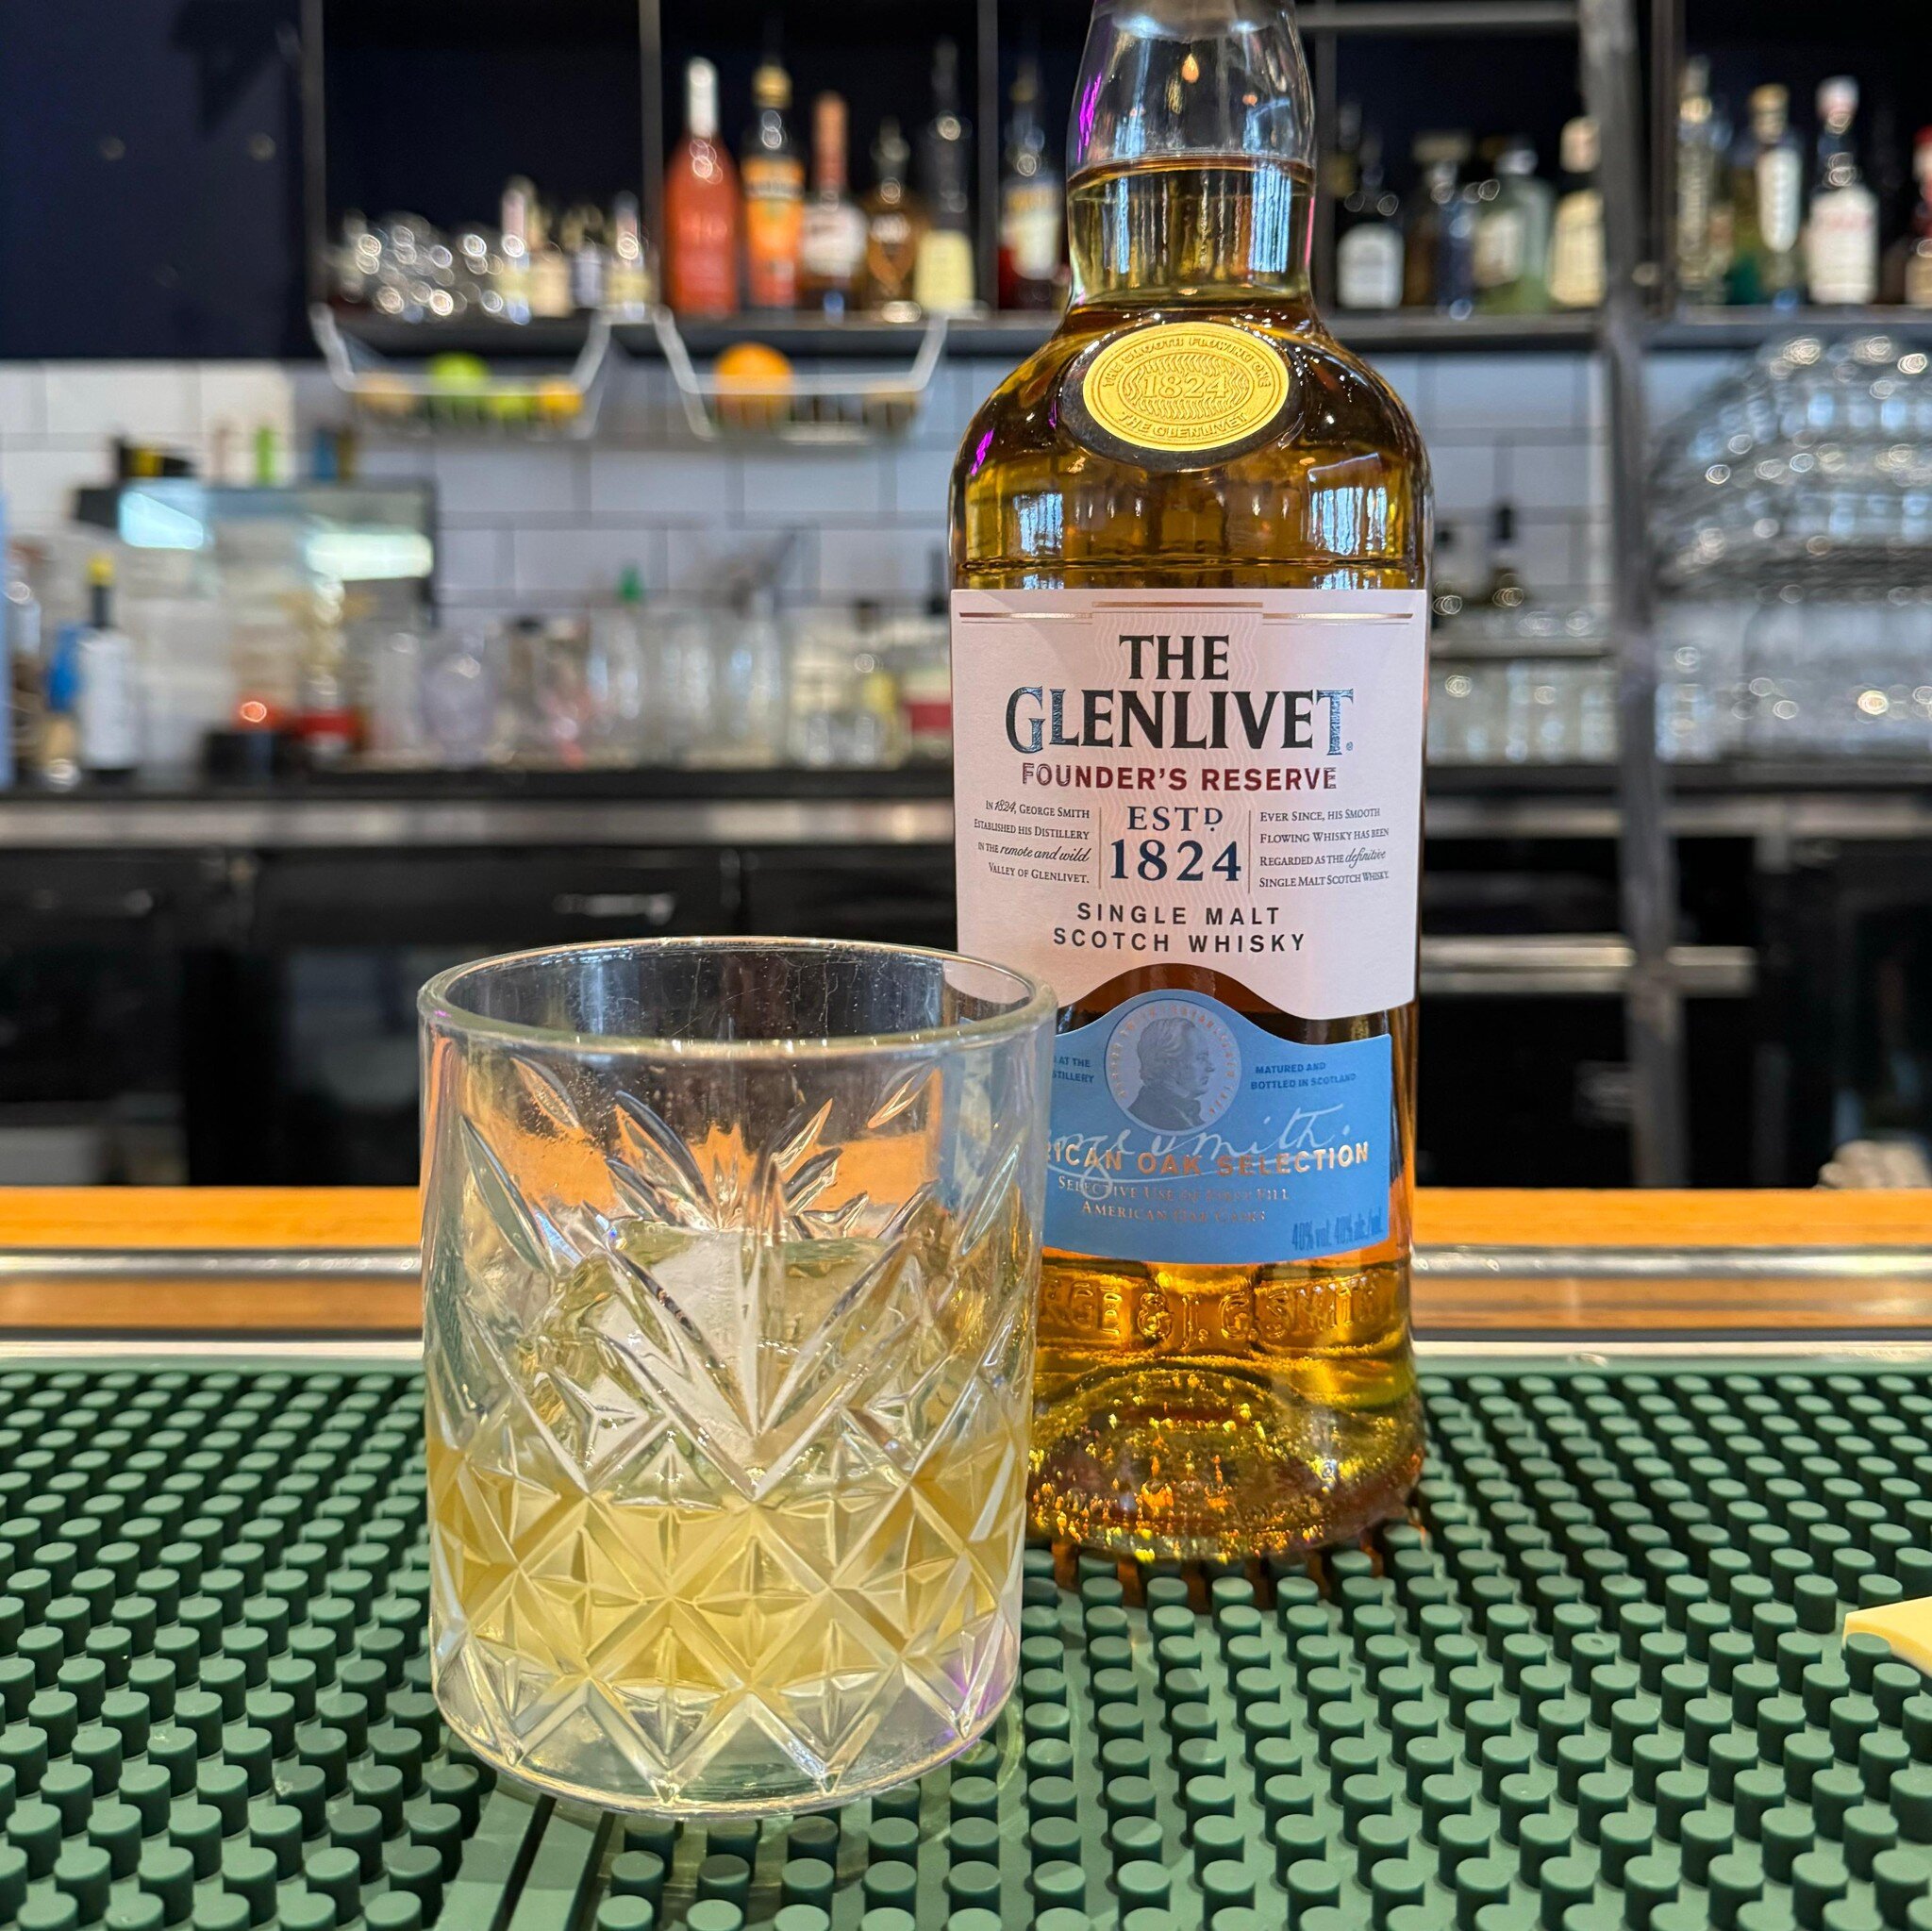 This week's #WhiskyOfTheWeek is The Glenlivet Founders Reserve! 

Usually $14, but you can grab it for just $10 this week at Plus 5! Don't miss out on this smooth and delicious Speyside single-malt known for its signature smoothness, with a touch of 